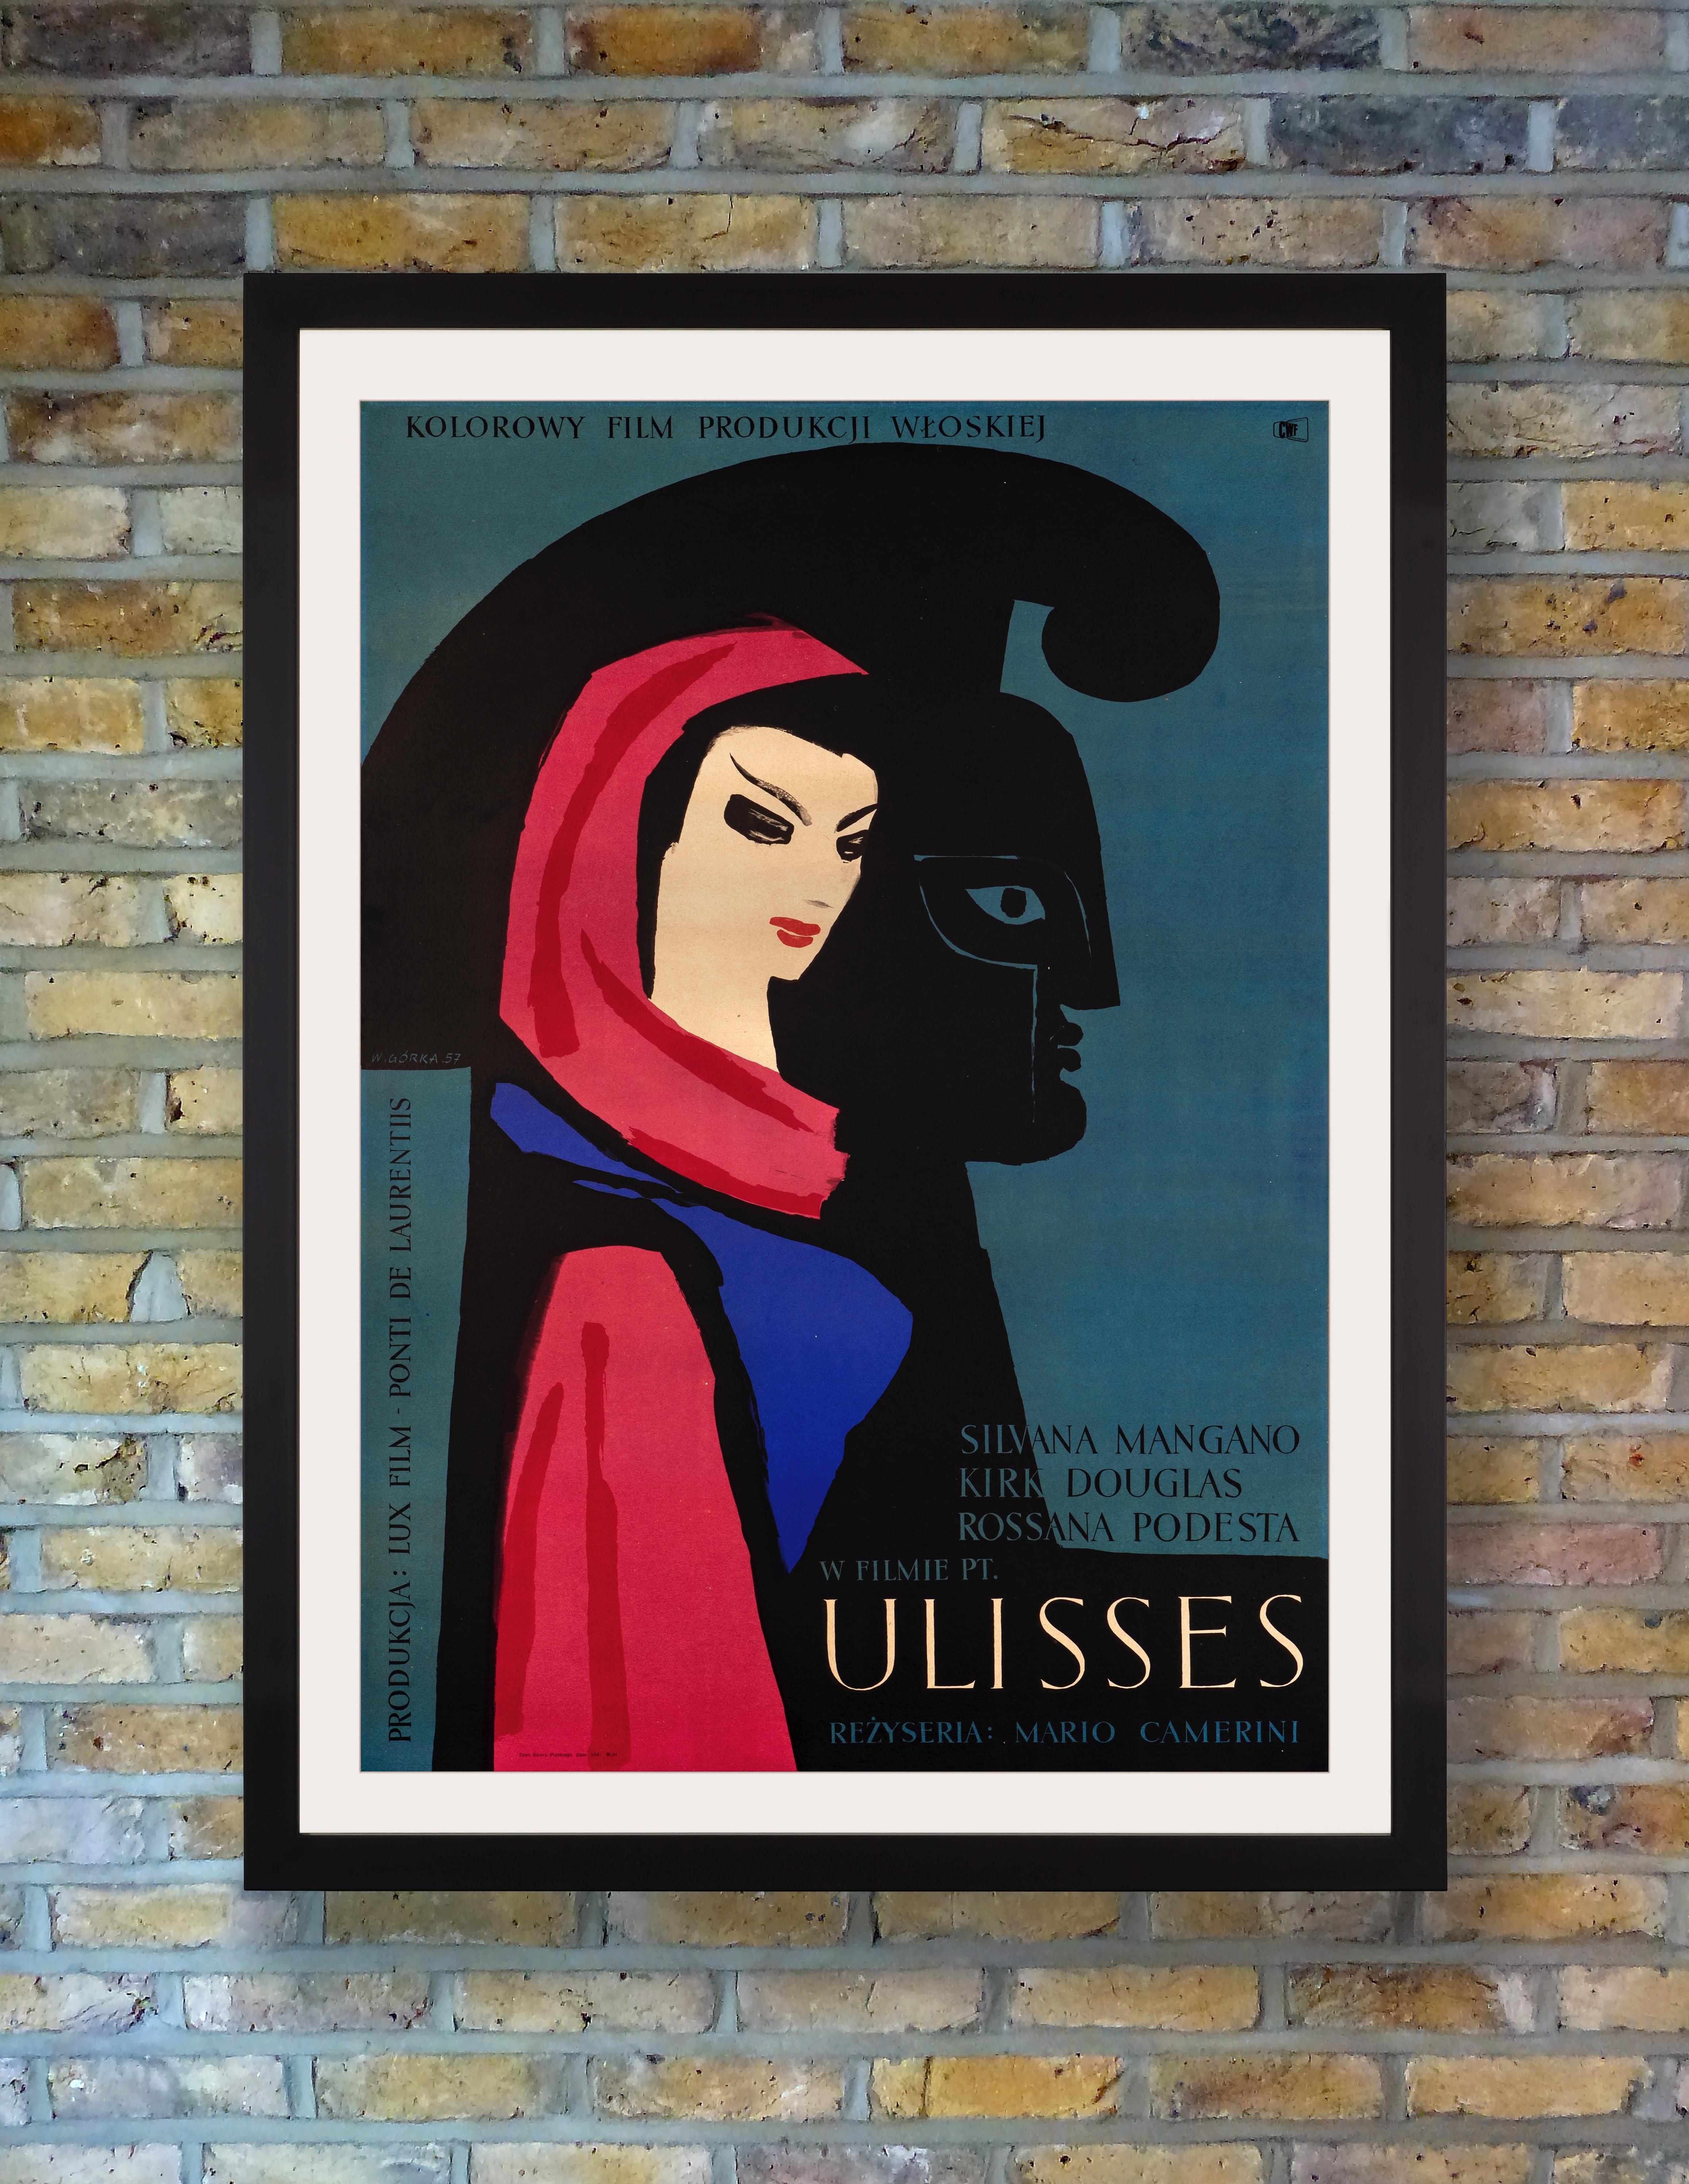 A simplified adaptation of Homer's 'Odyssey,' the 1954 Italian fantasy-adventure film 'Ulysses' follows the warrior king on his wandering ten year journey home to Ithaca after the Trojan War, where his loyal queen and son pray for his safe return.